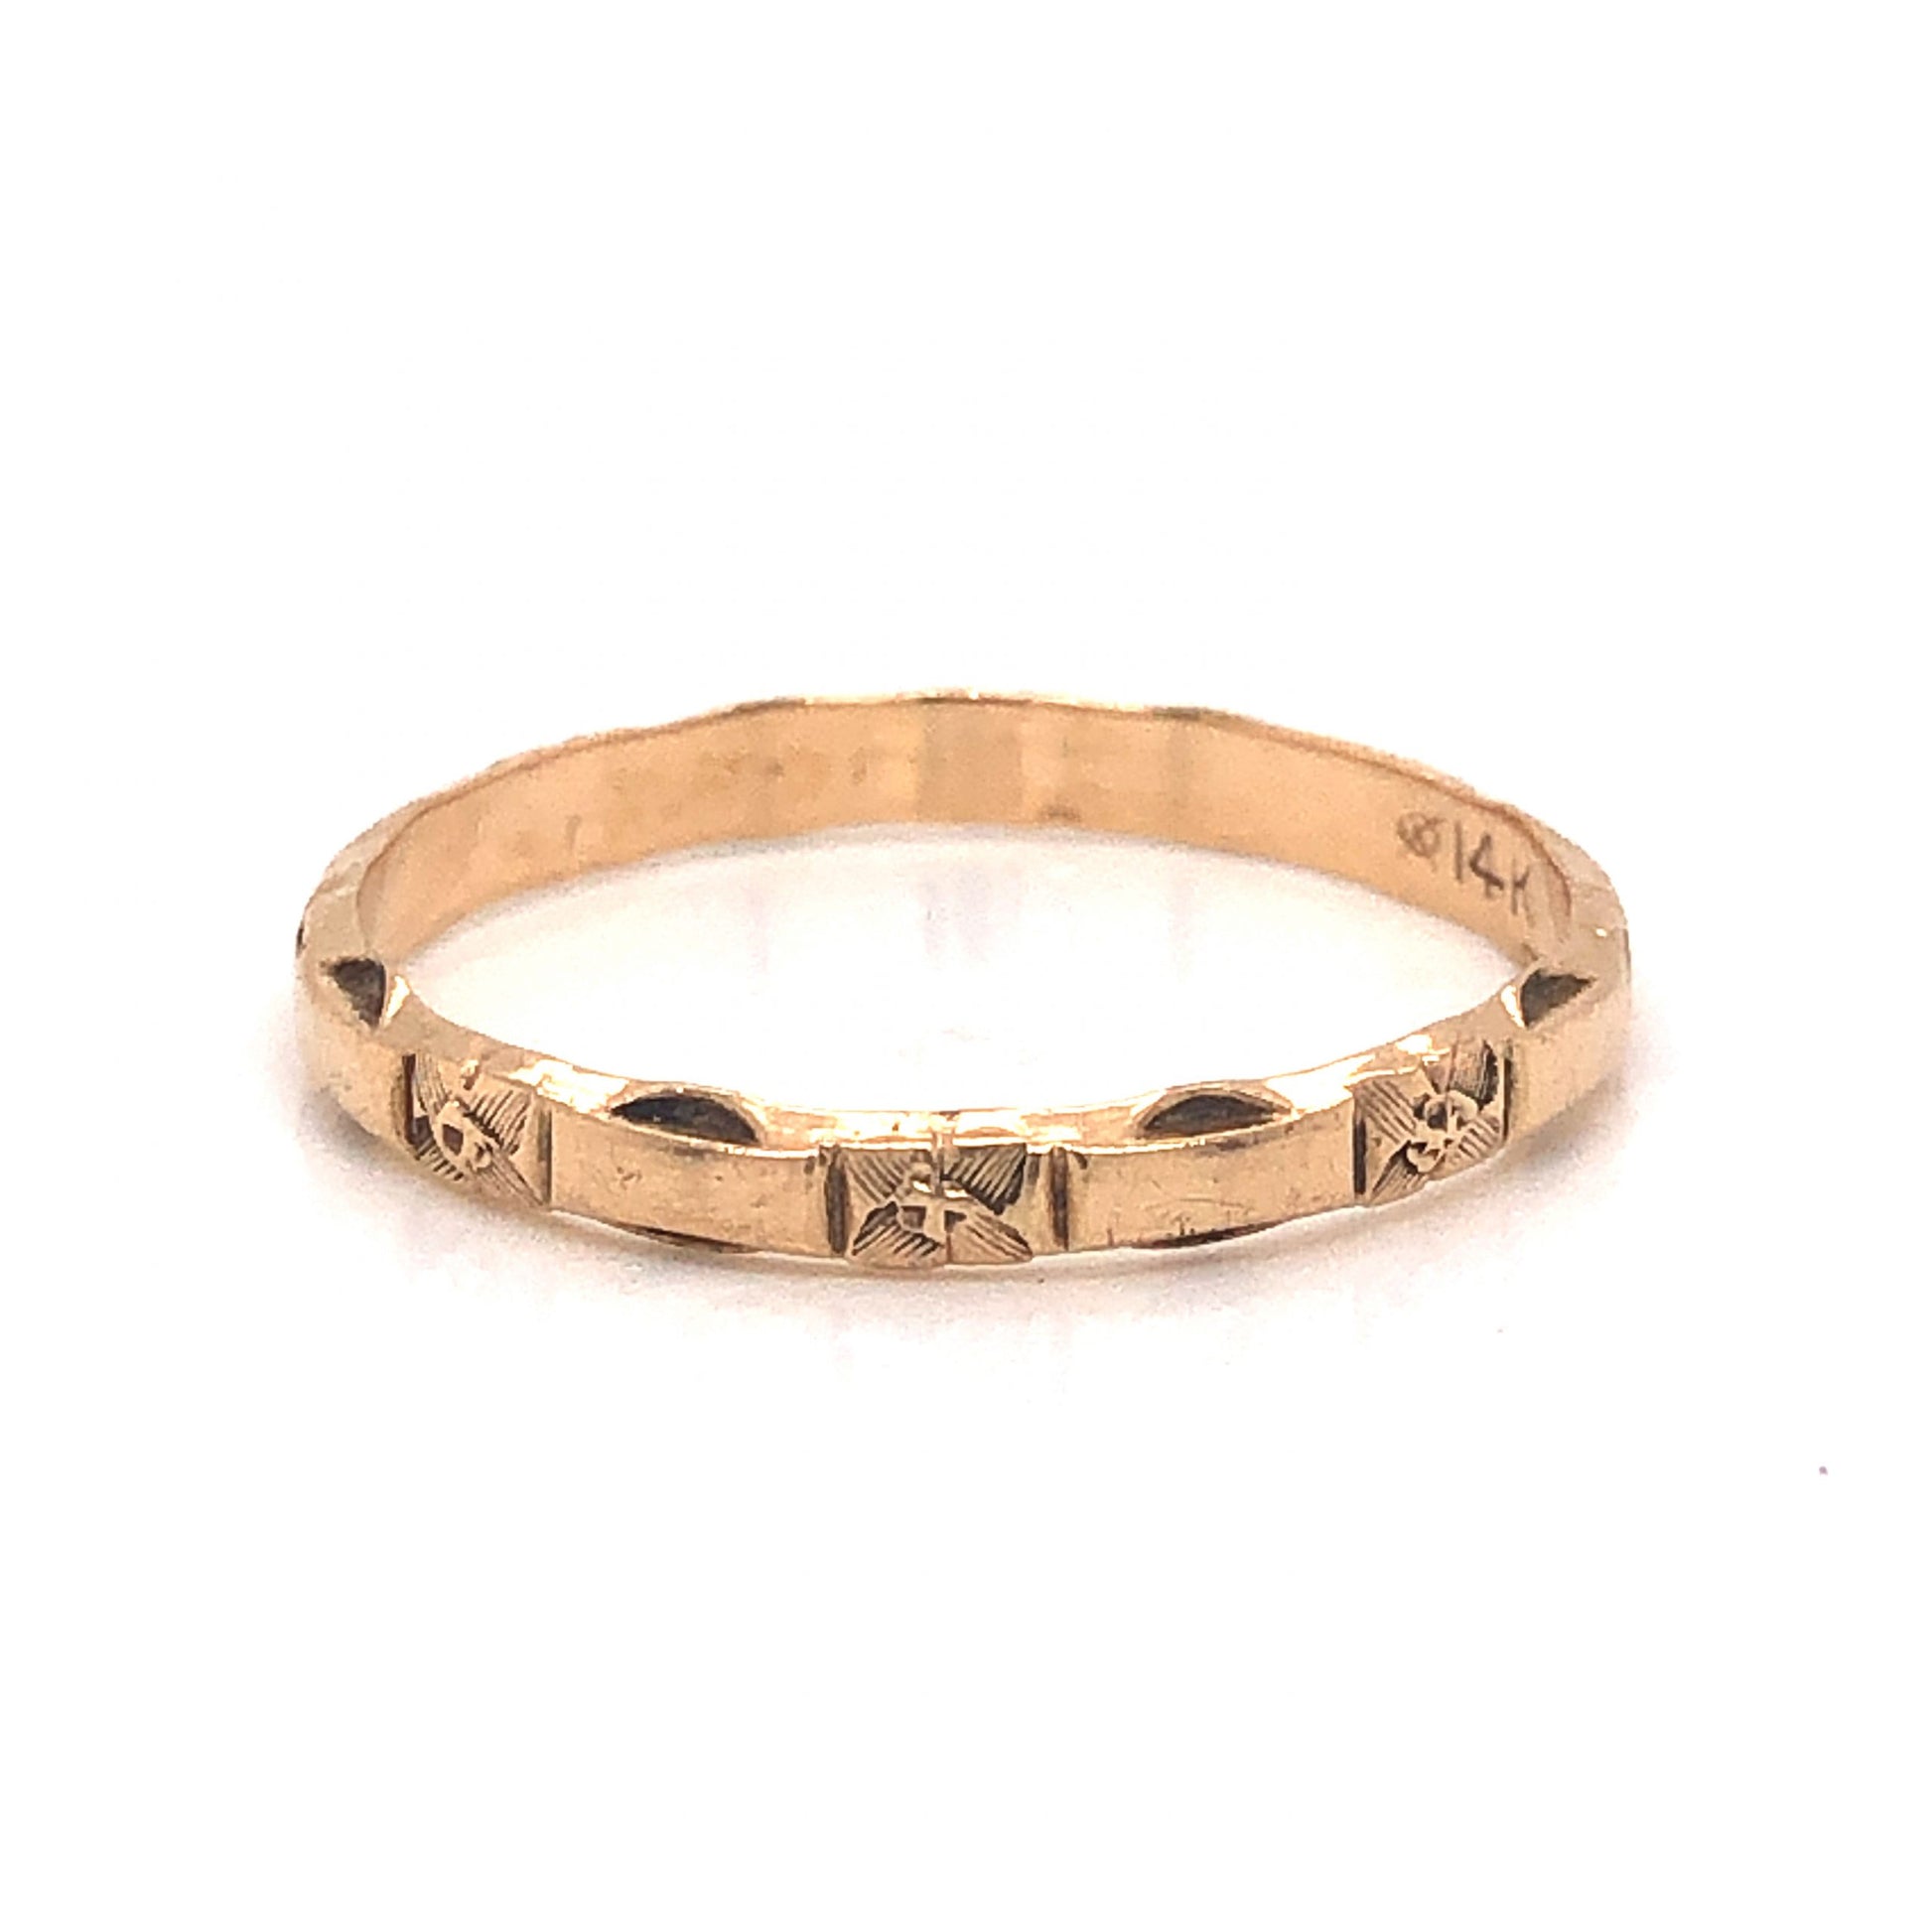 Antique Engraved Orange Blossom Wedding Band in 14k Yellow GoldComposition: 14 Karat Yellow Gold Ring Size: 7 Total Gram Weight: 1.3 g Inscription: 14k
      